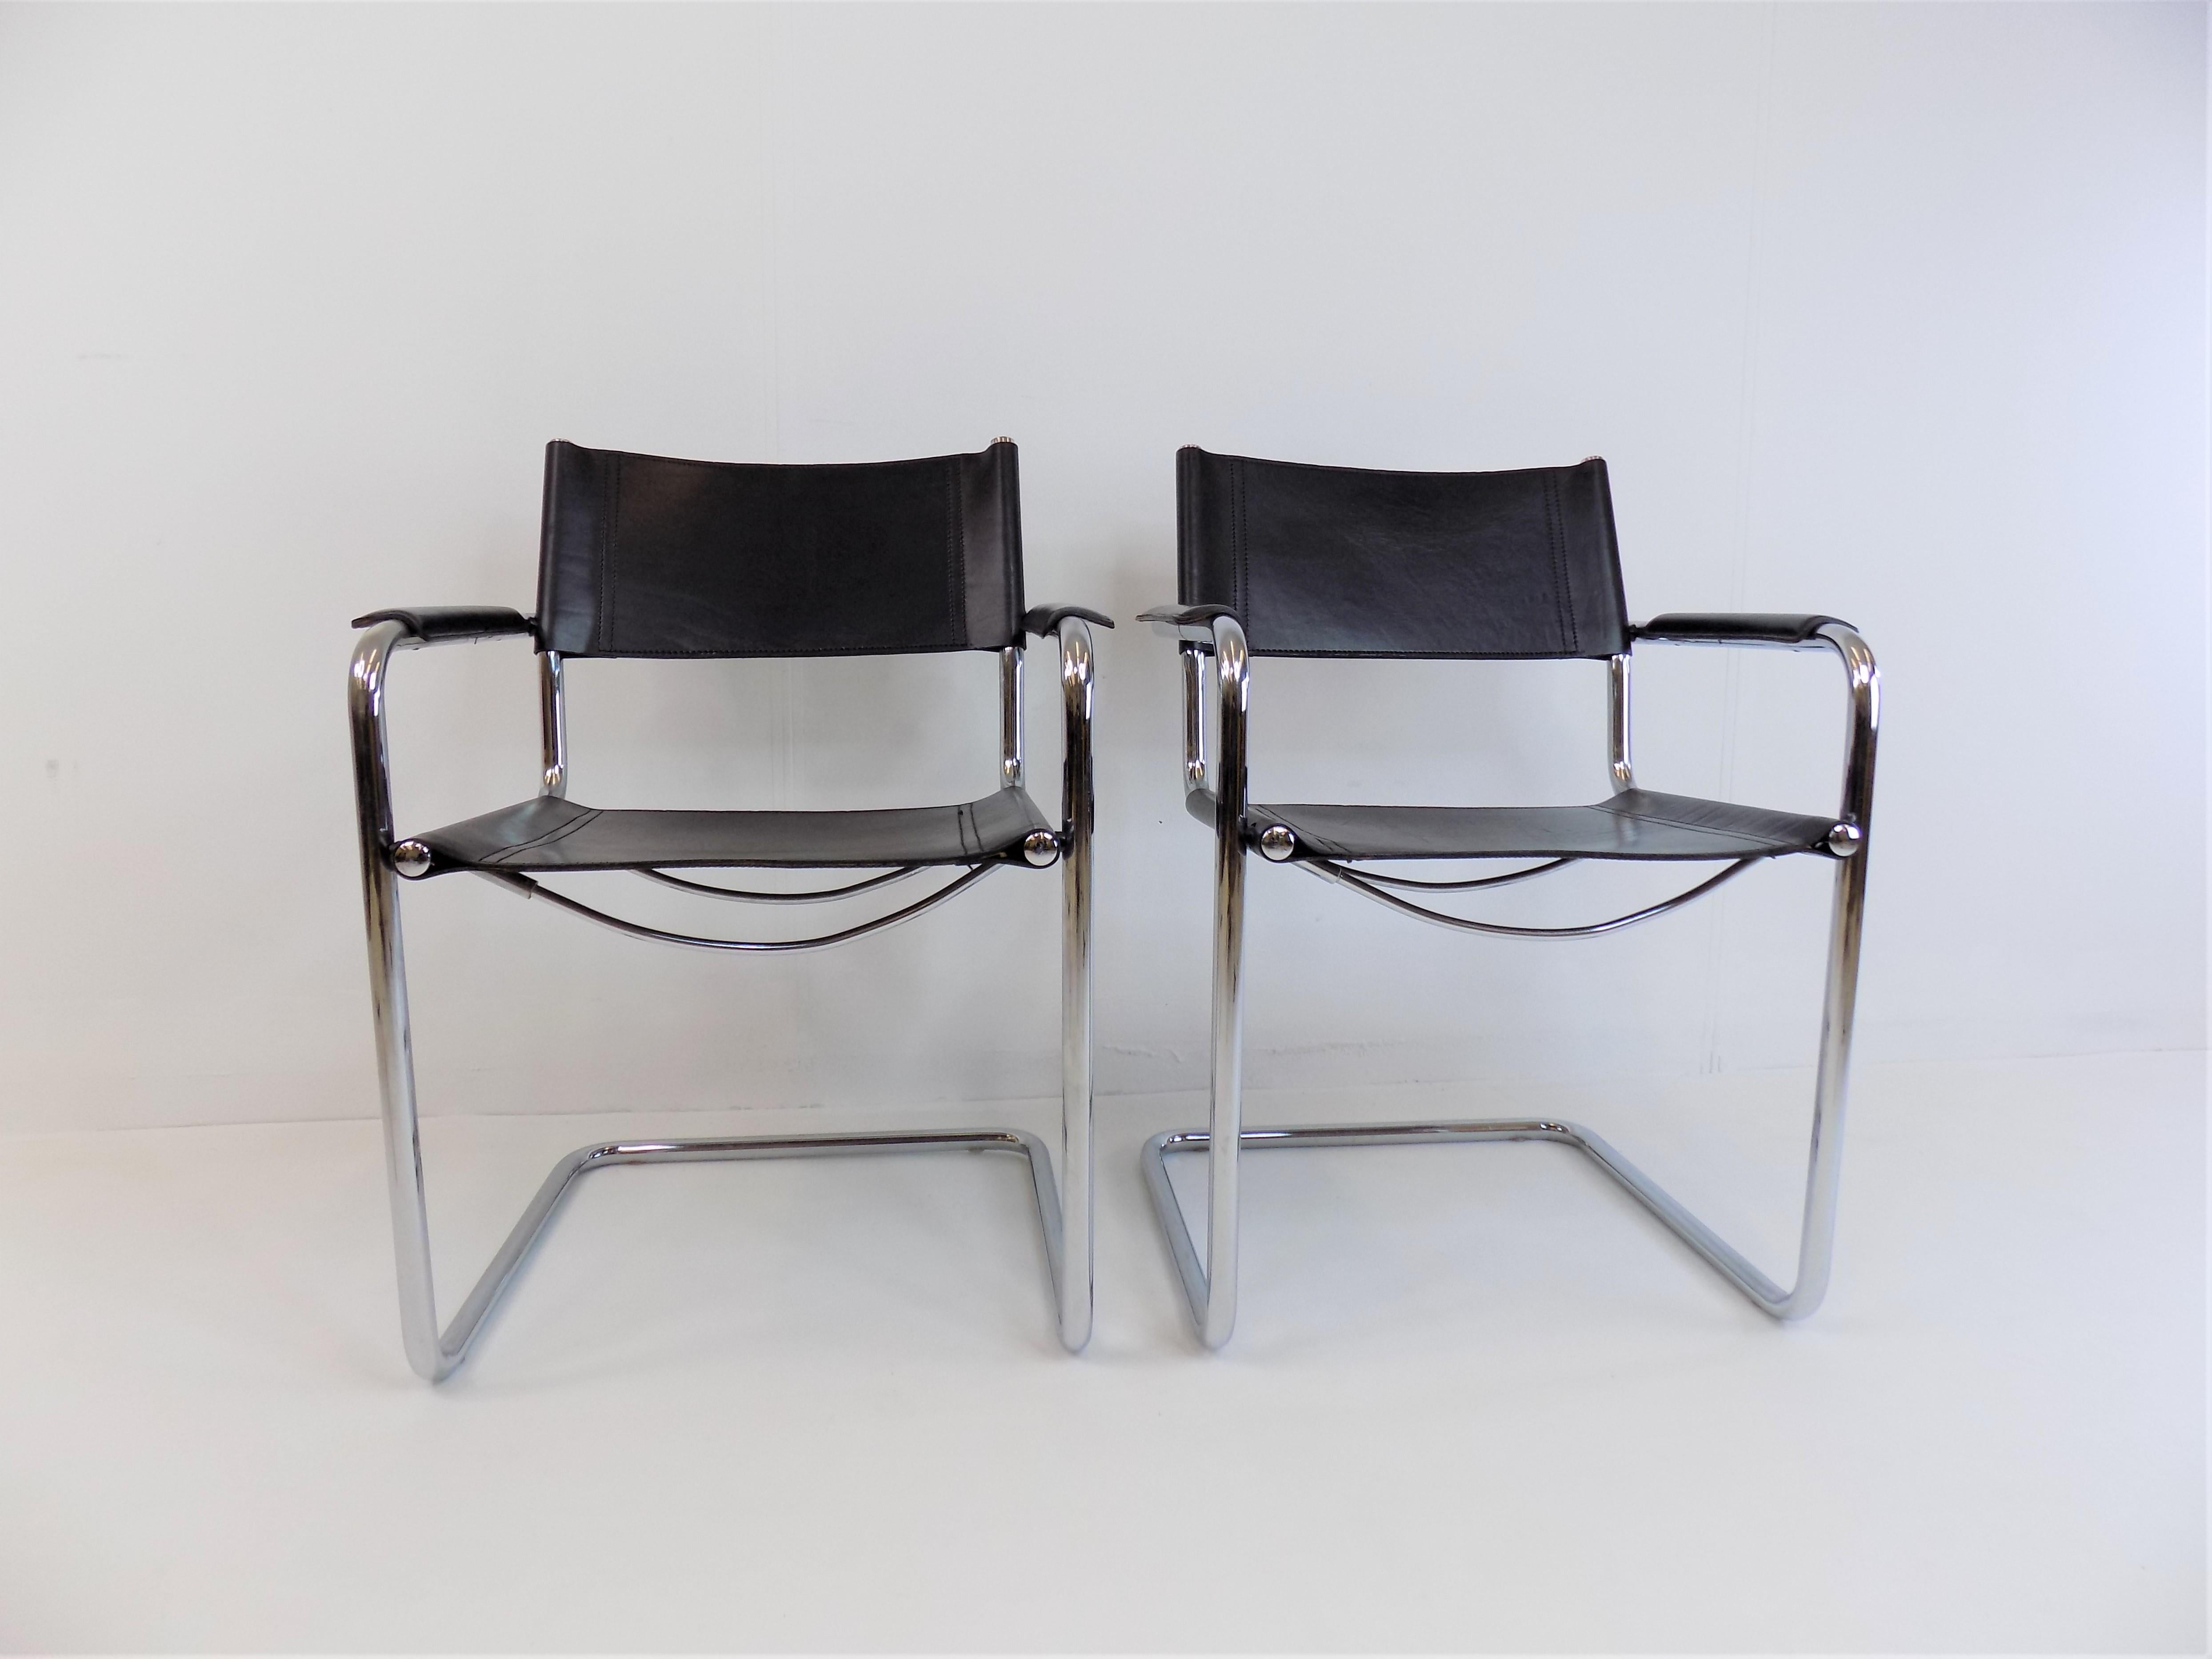 This classic MG 5 cantilever set, in black saddle leather, is in excellent condition. The thick leather shows minimal signs of use, the chrome rods are perfect. The armrests are undamaged. All chairs have Matteo Grassi leather embossing on the back.